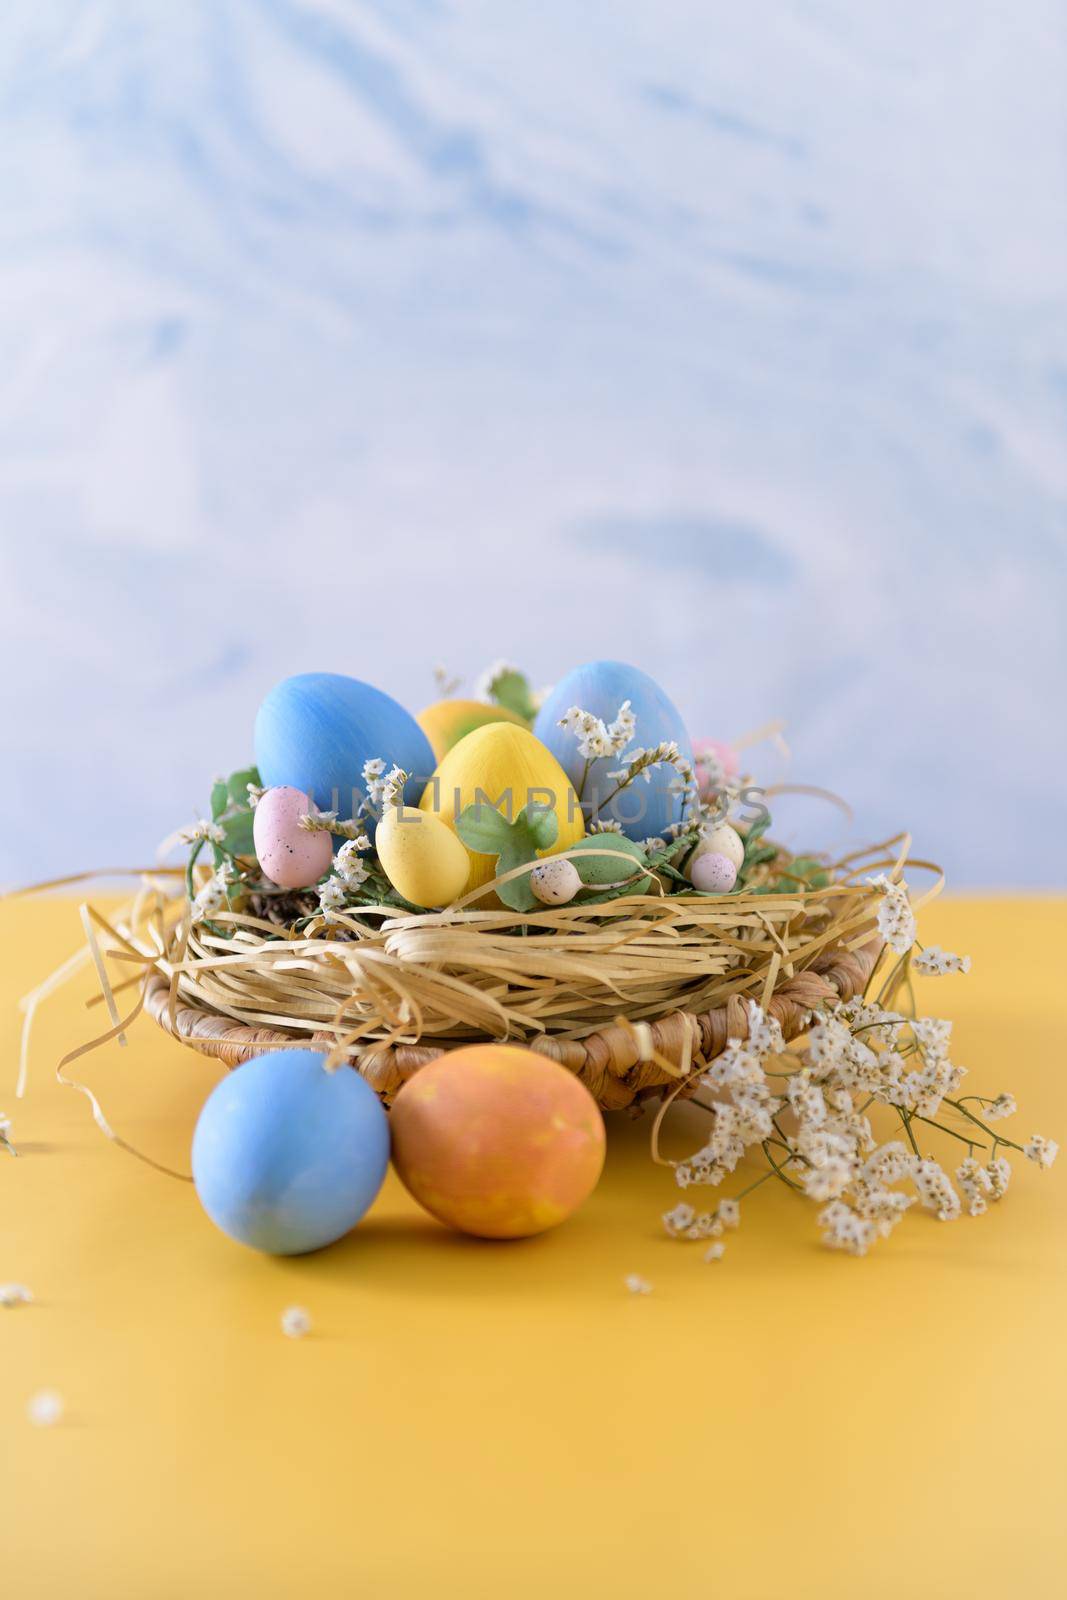 Easter eggs in nest on blue background and yellow table.